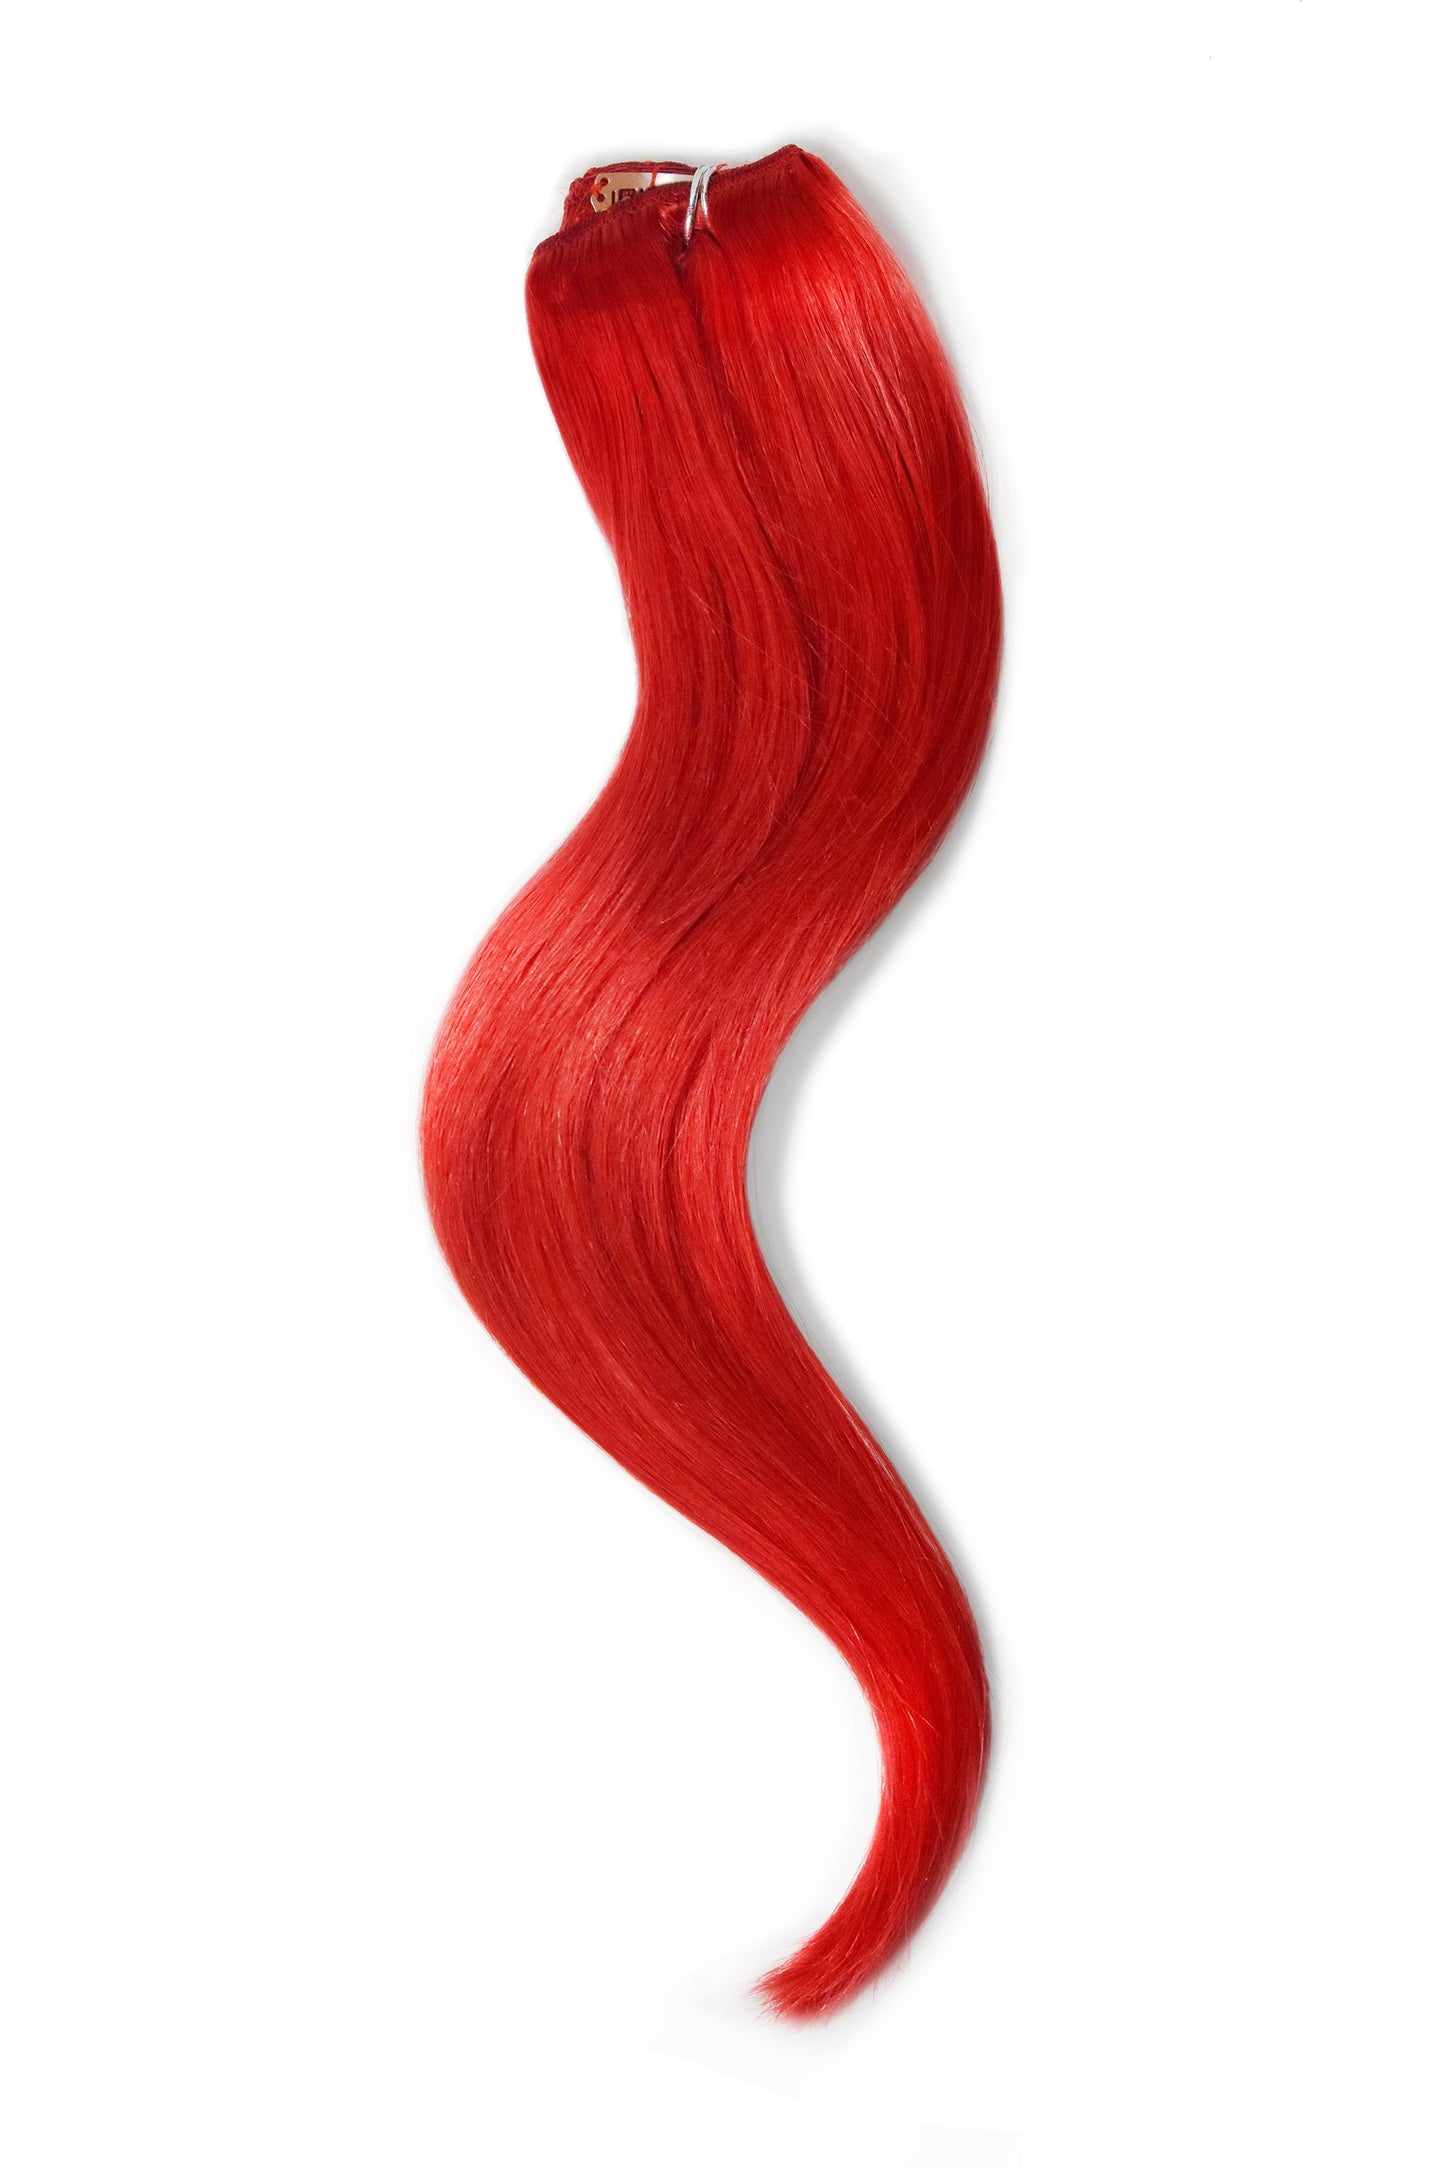 One Piece Top-up Remy Clip in Human Hair Extensions - Red